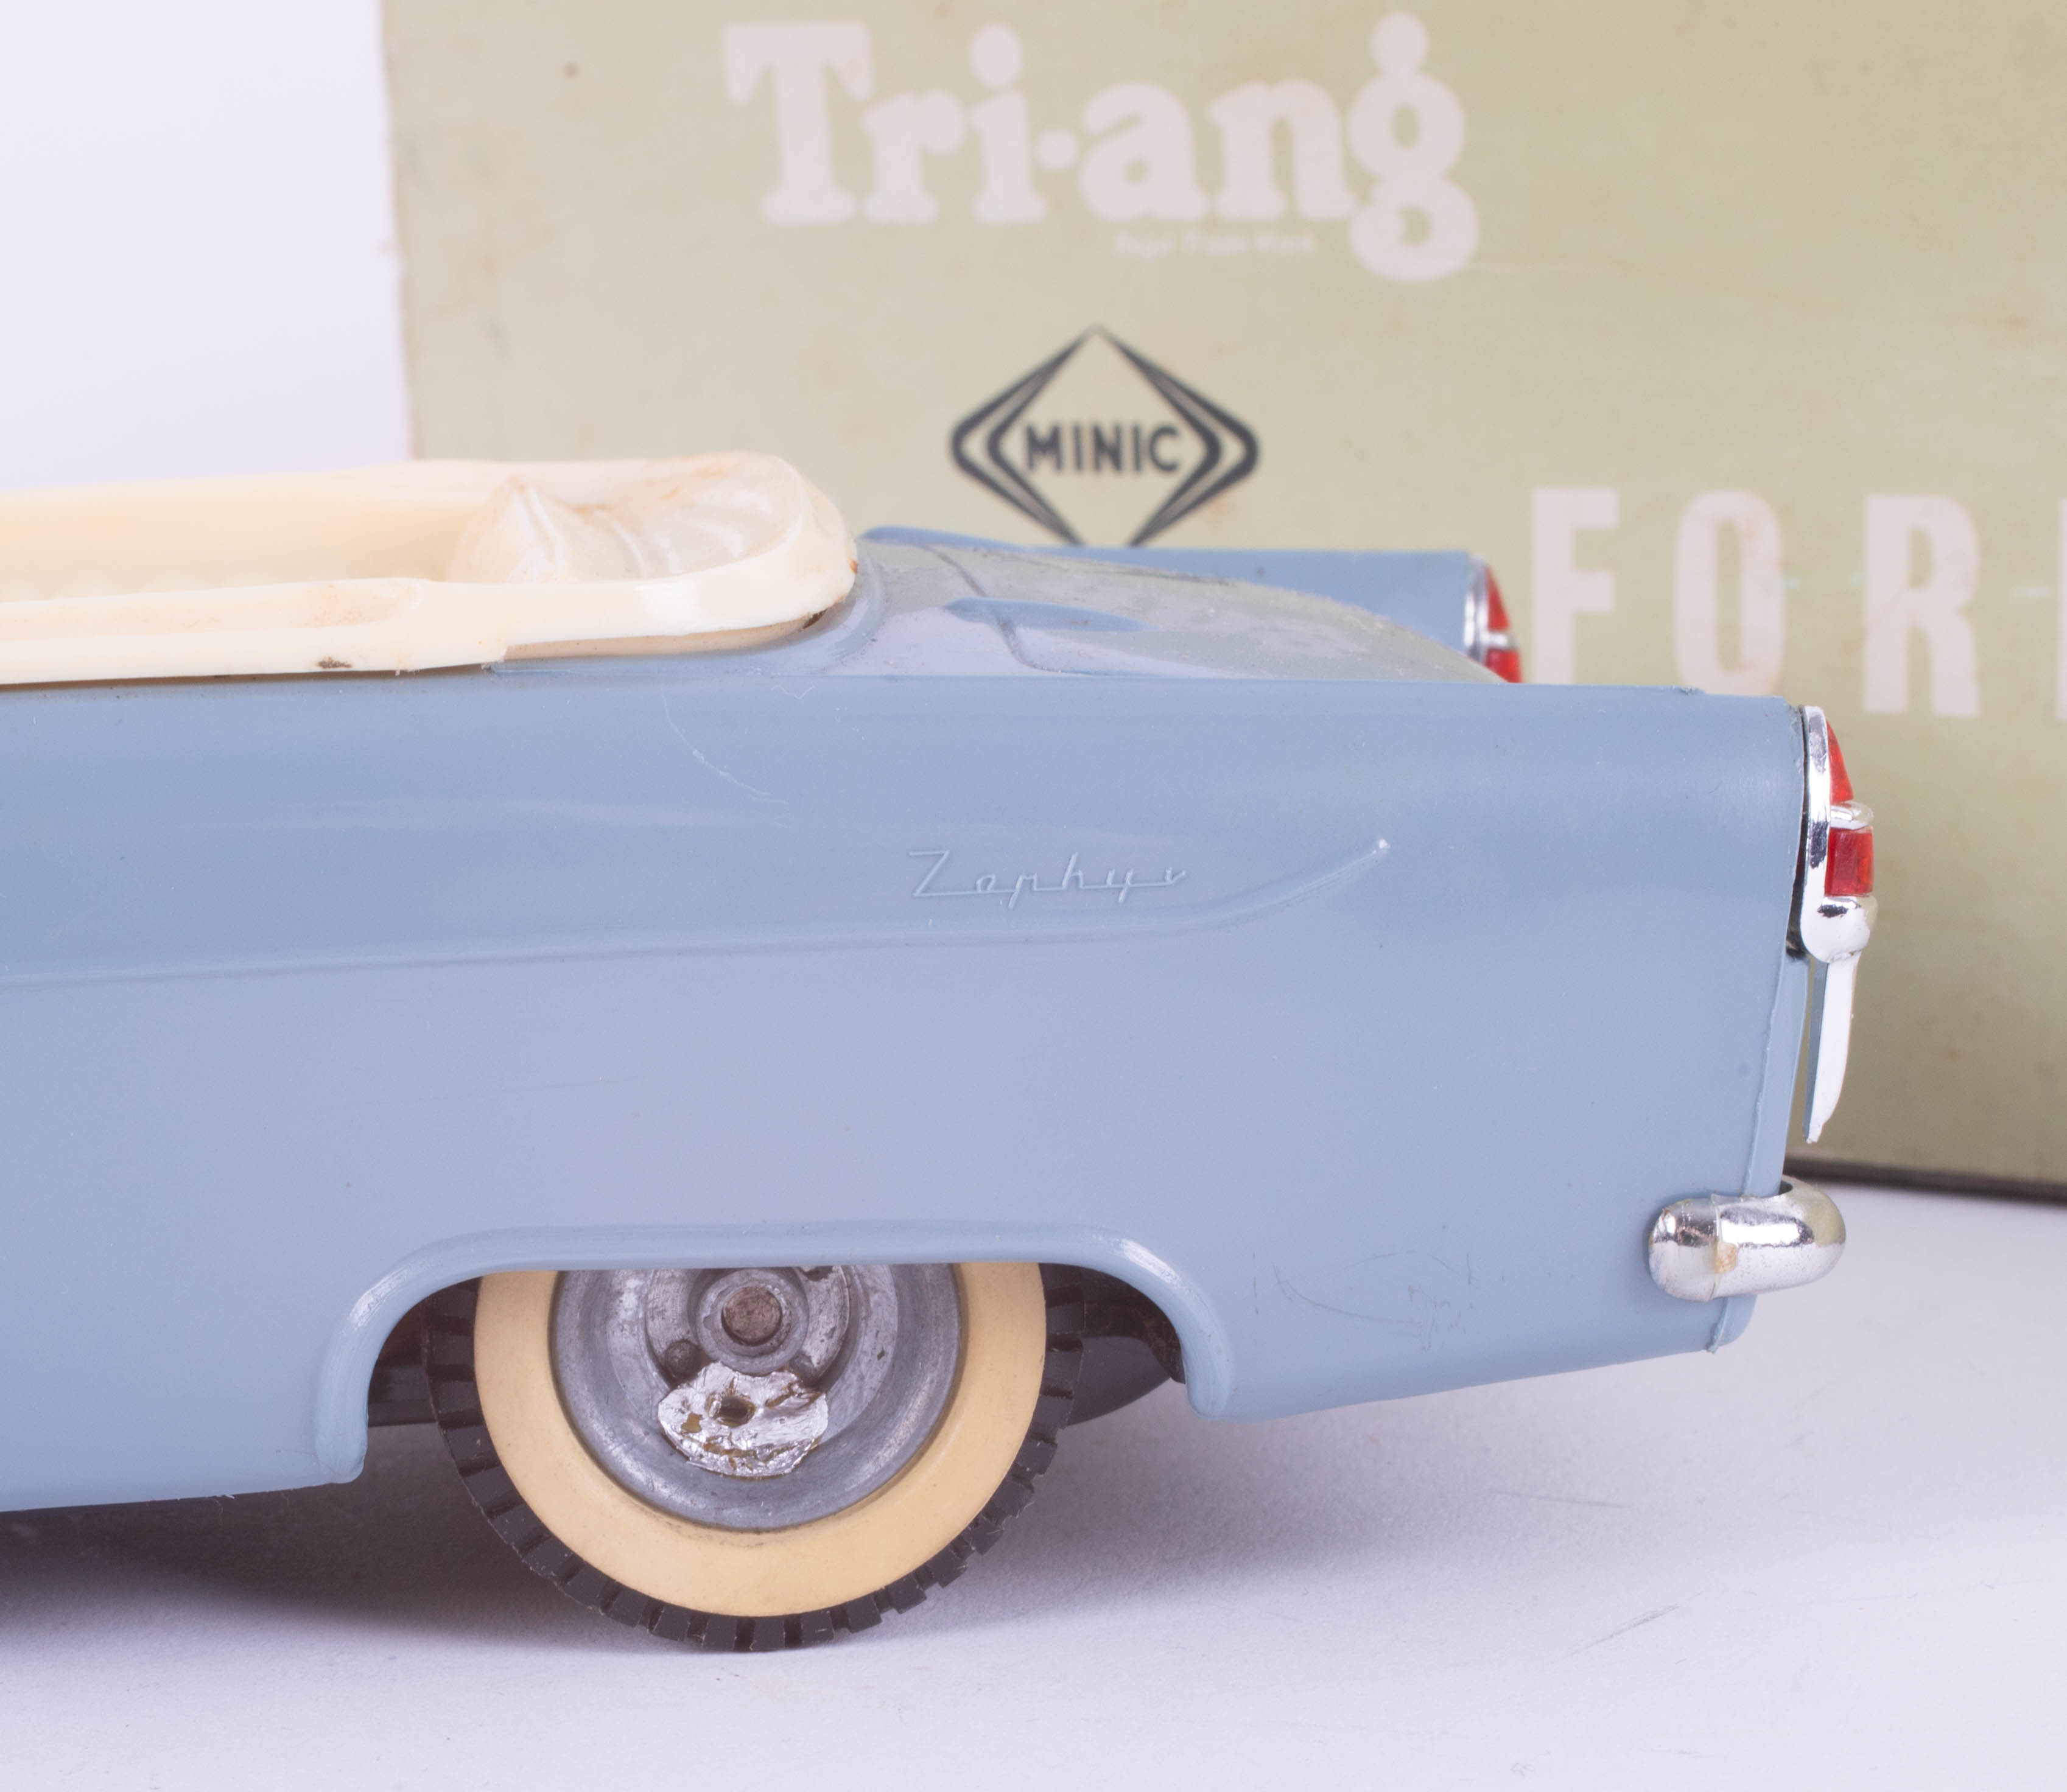 Tri-ang Minic, Ford Zephyr scale model, boxed (damaged). - Image 3 of 3